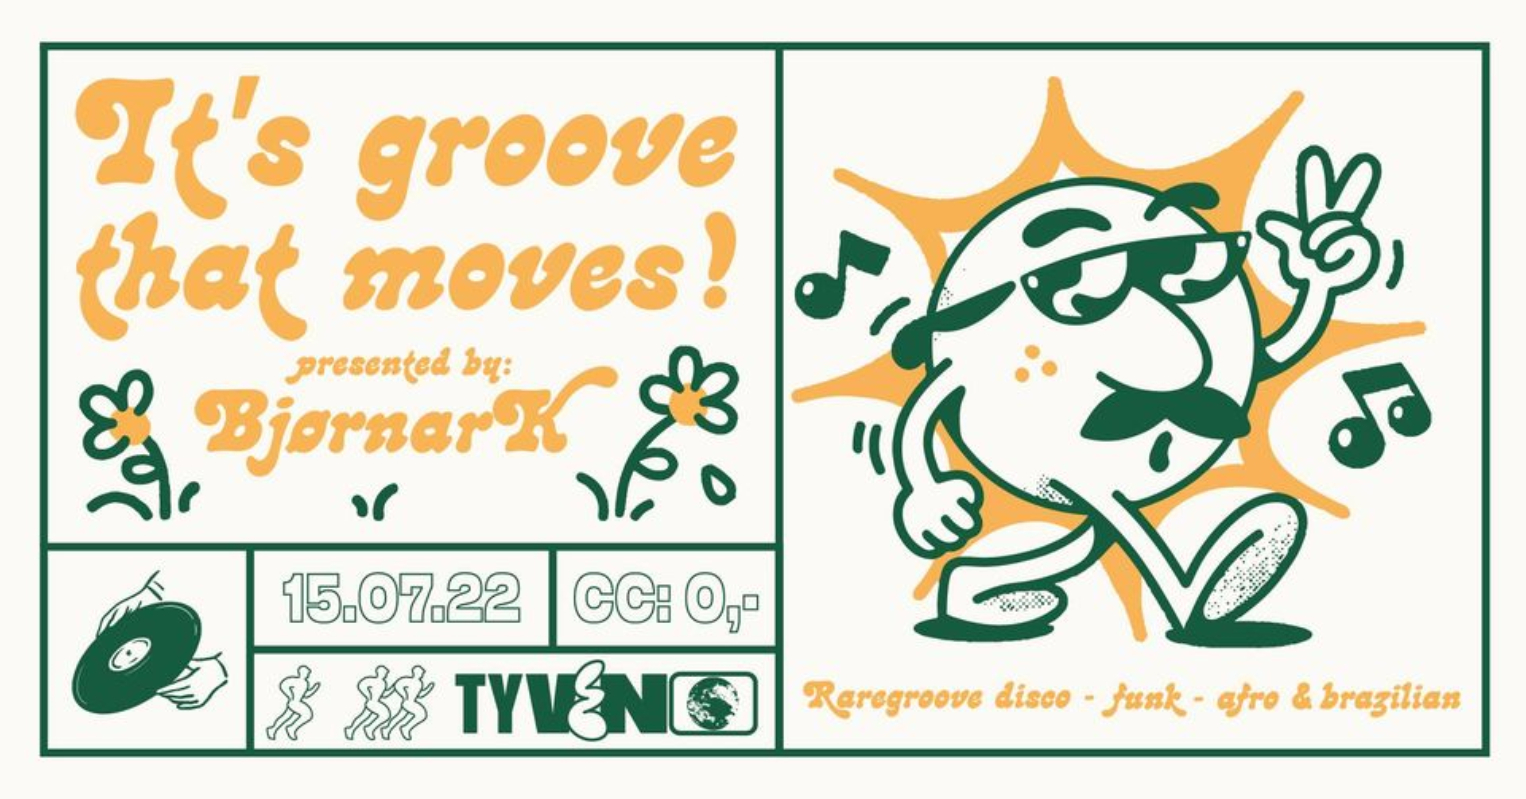 It's Groove That Moves! / KLUBB TYVEN